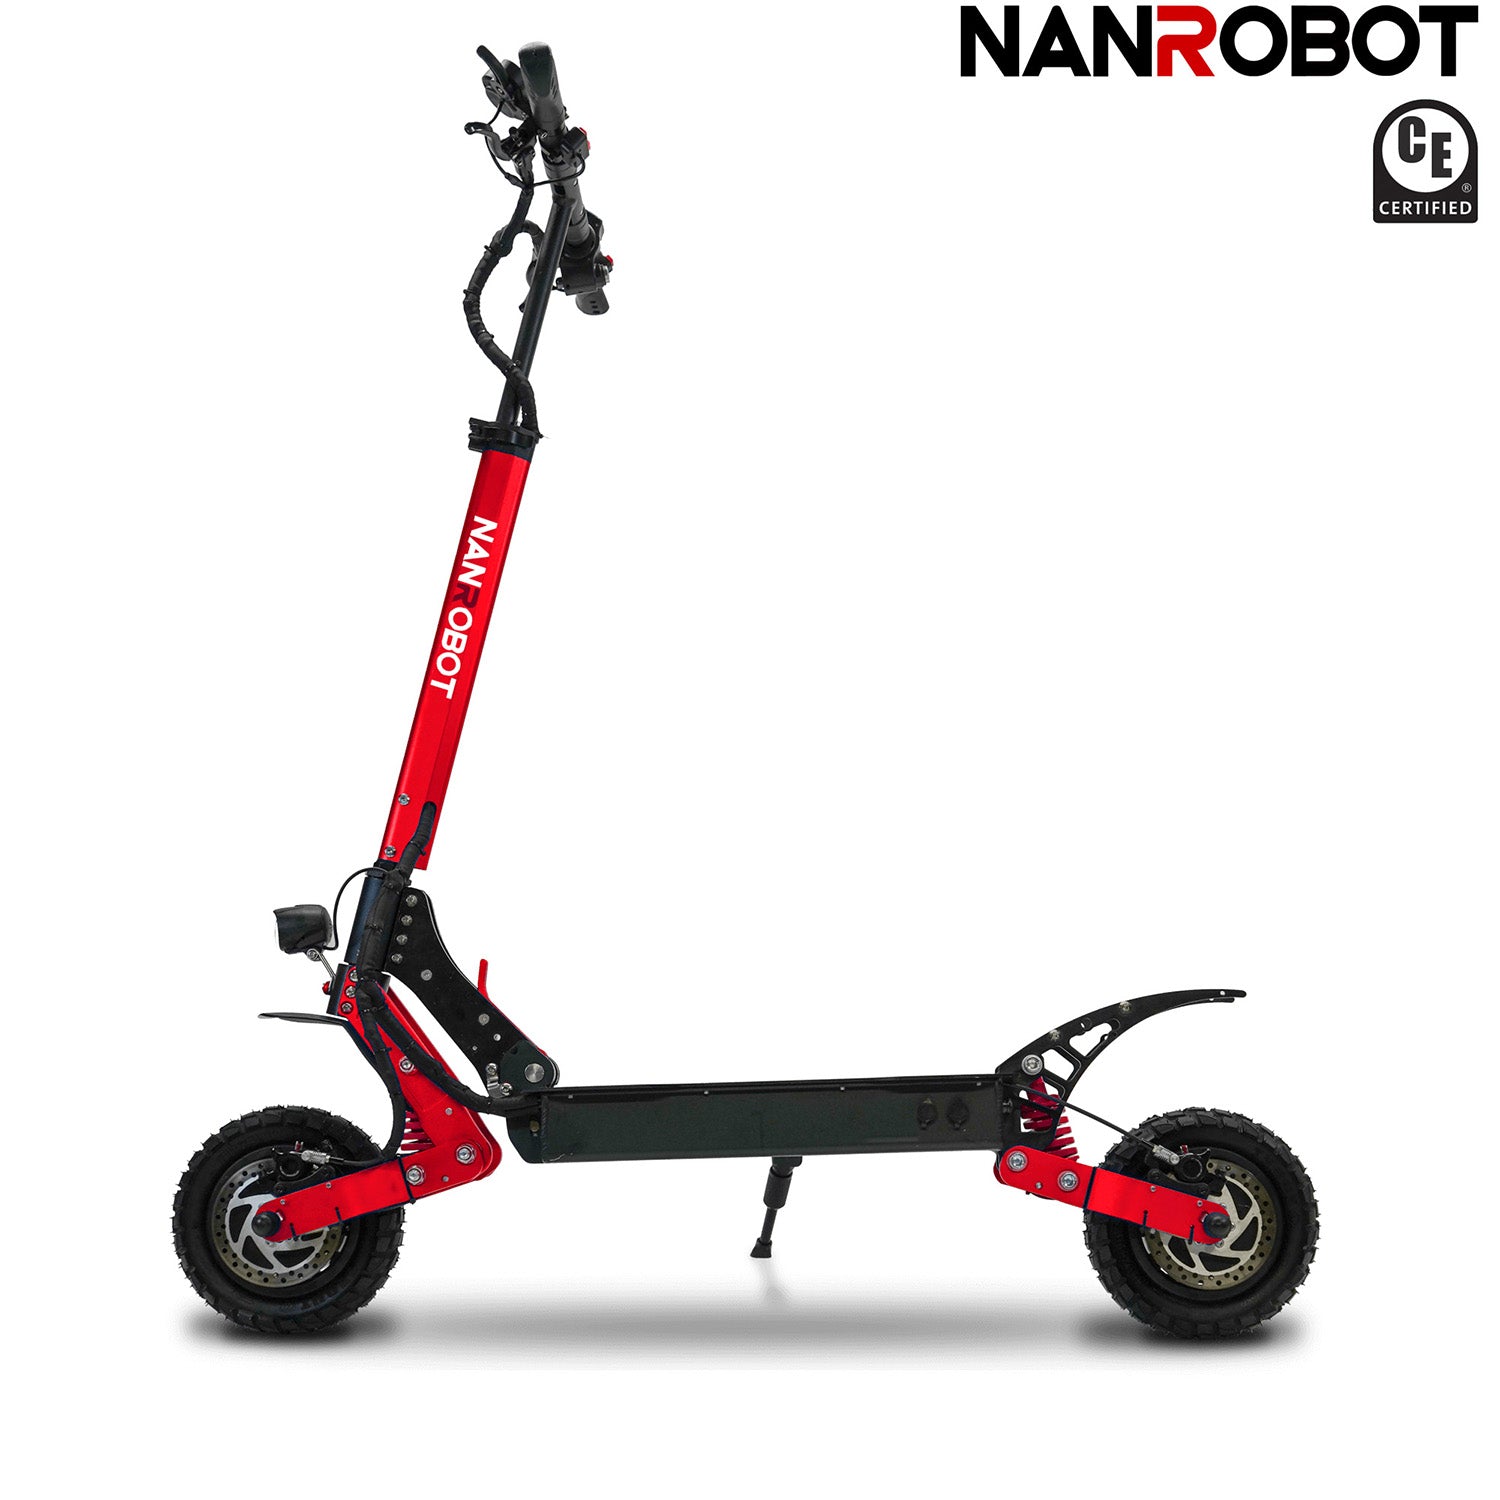 D4+3.0 NANROBOT Electric Scooter With 2000W Dual Motor 52V 23.4AH with Long Battery Range,Waterproof,Tire Size:10 inch